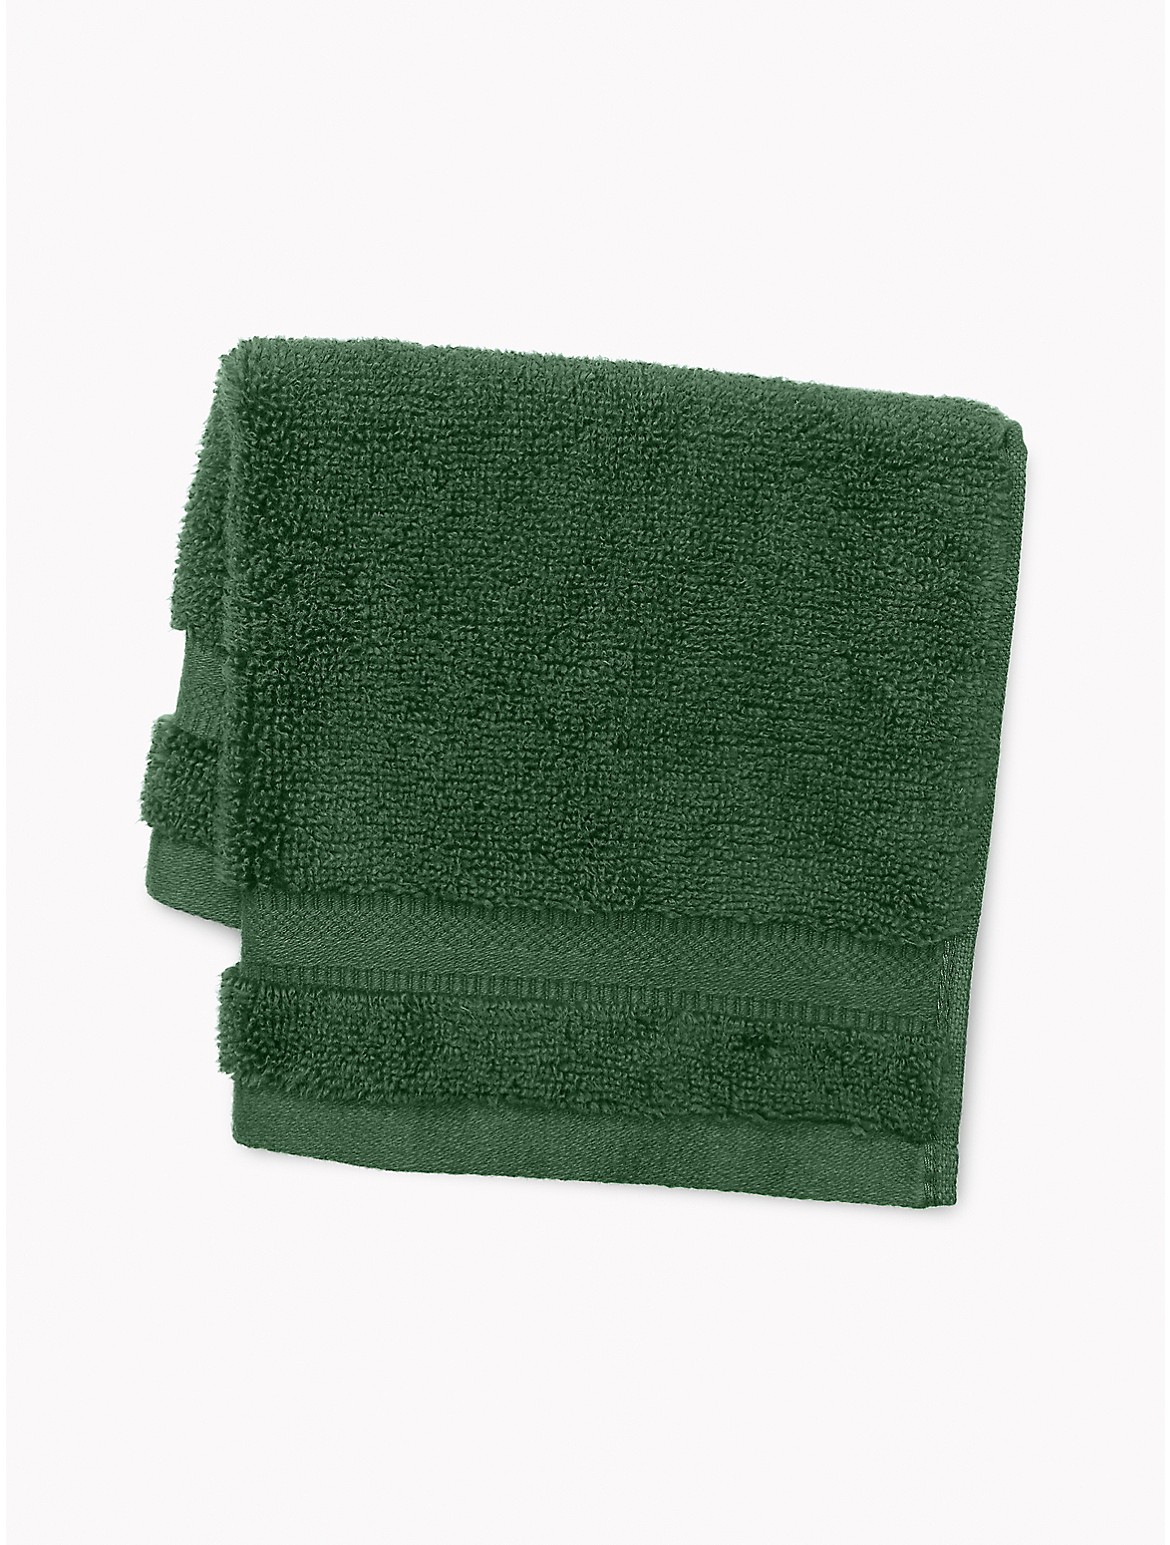 Tommy Hilfiger Signature Solid Washcloth in Pine Needle - Green